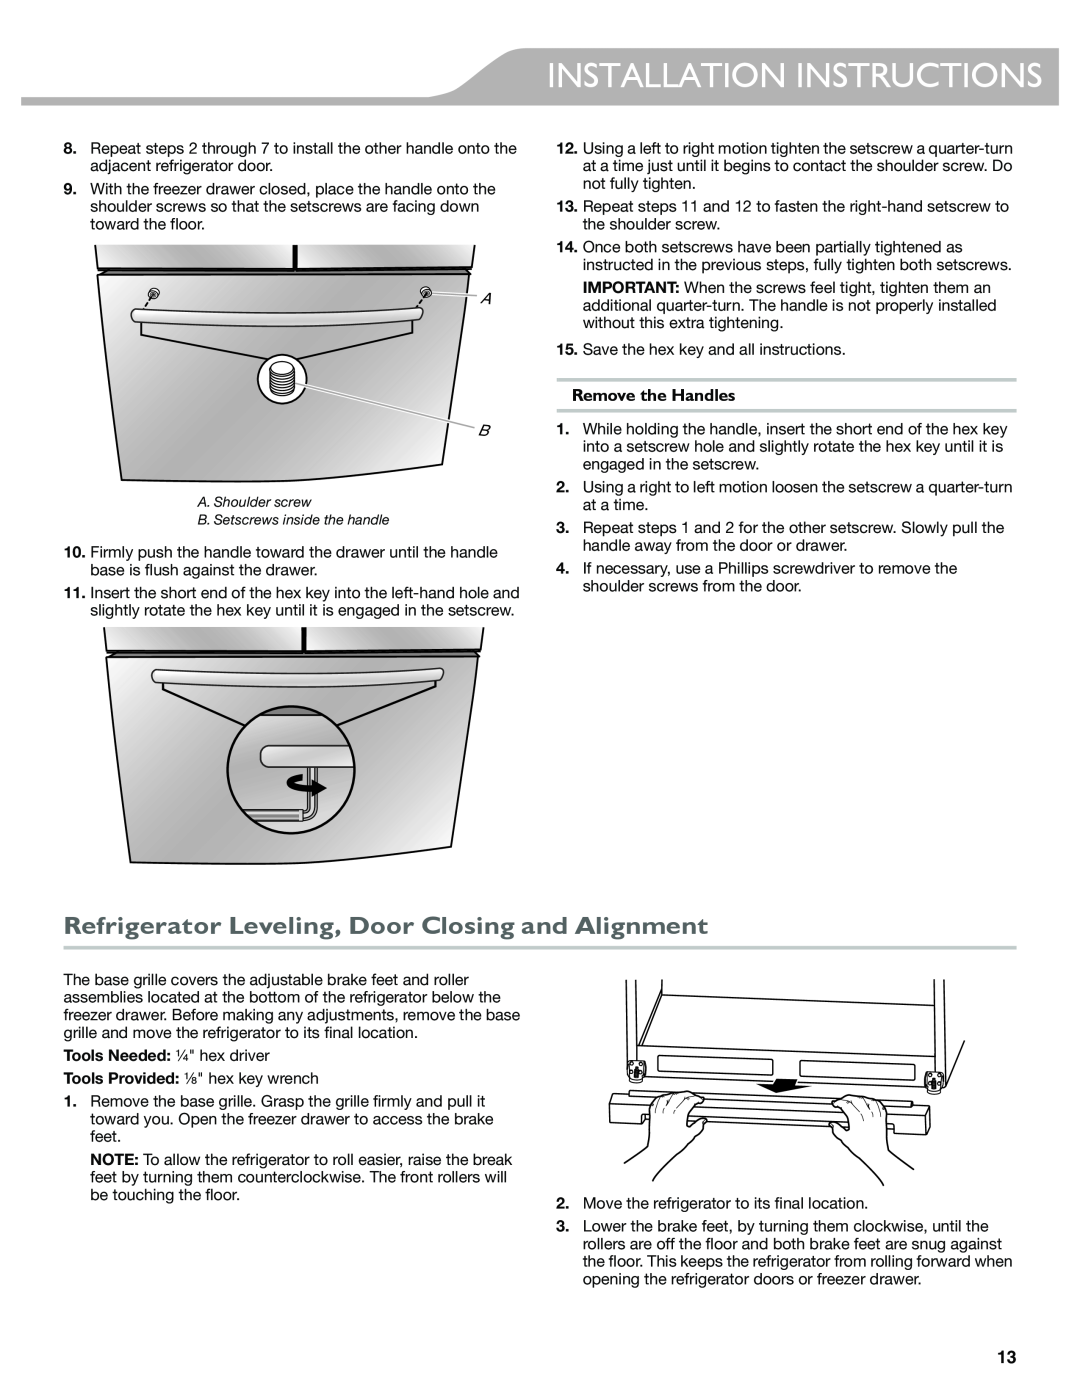 KitchenAid W10417002A Refrigerator Leveling, Door Closing and Alignment, Remove the Handles, Installation Instructions 